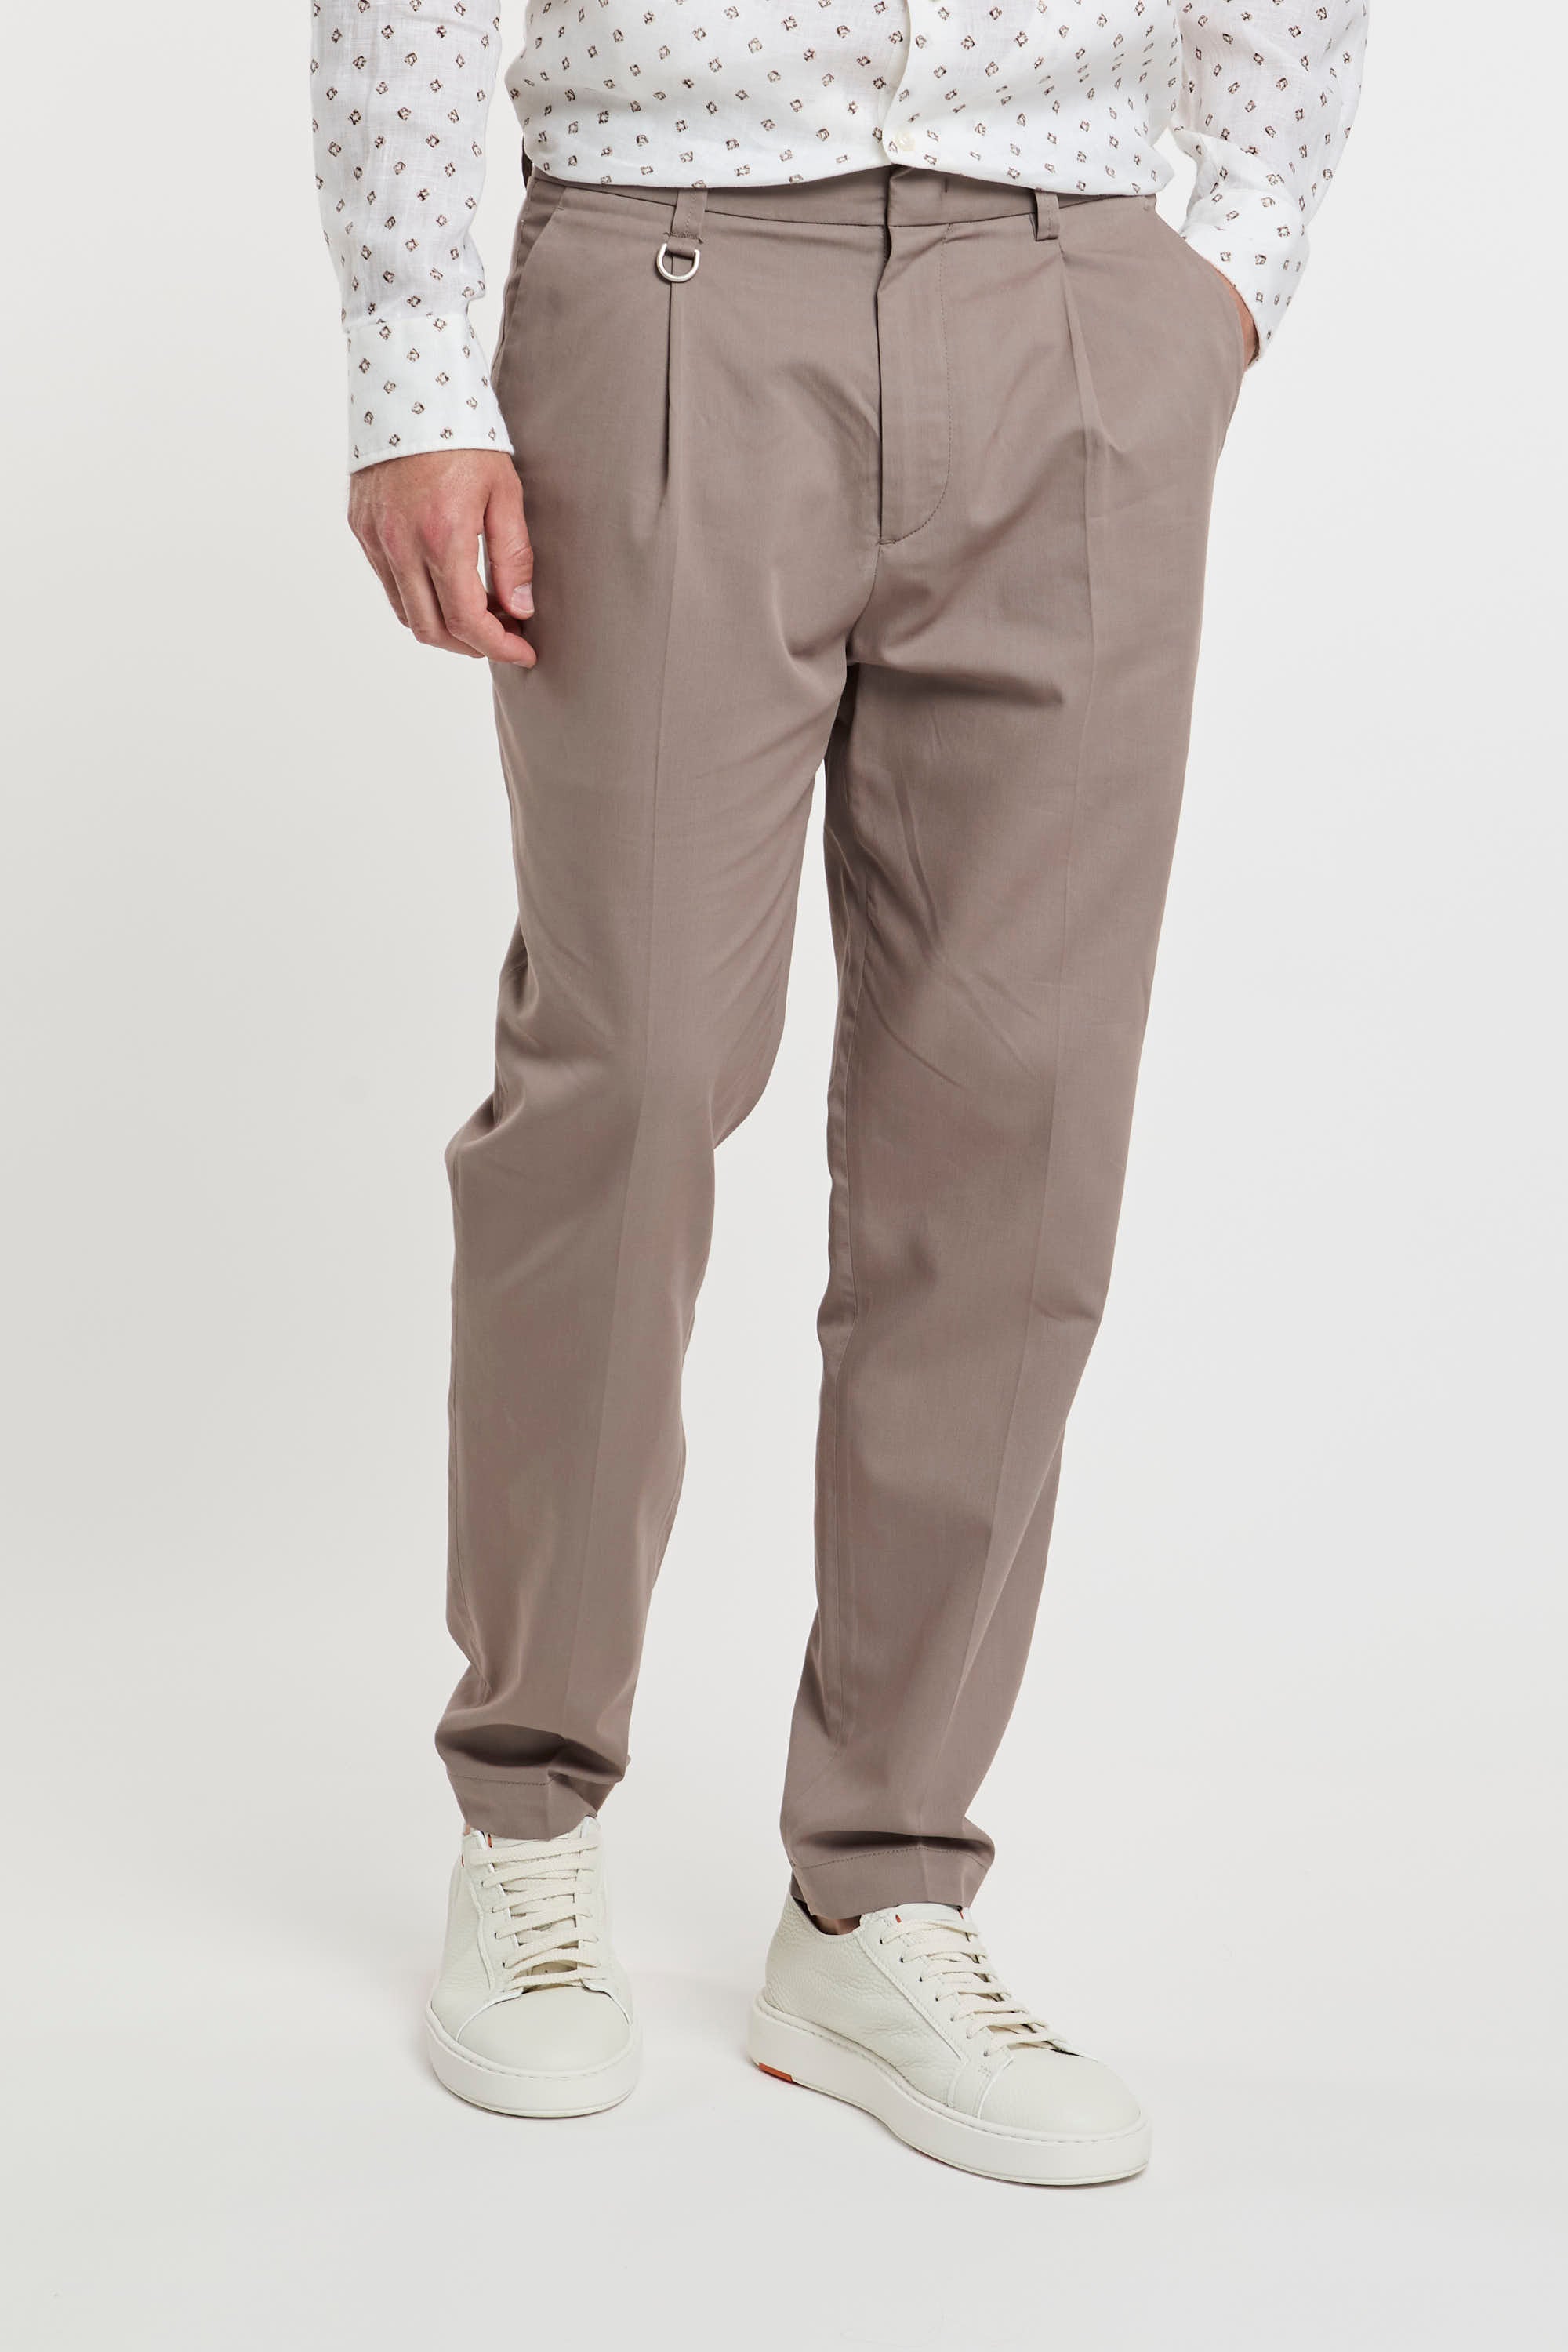 Paolo Pecora Cotton Blend Chino Trousers in Taupe-3